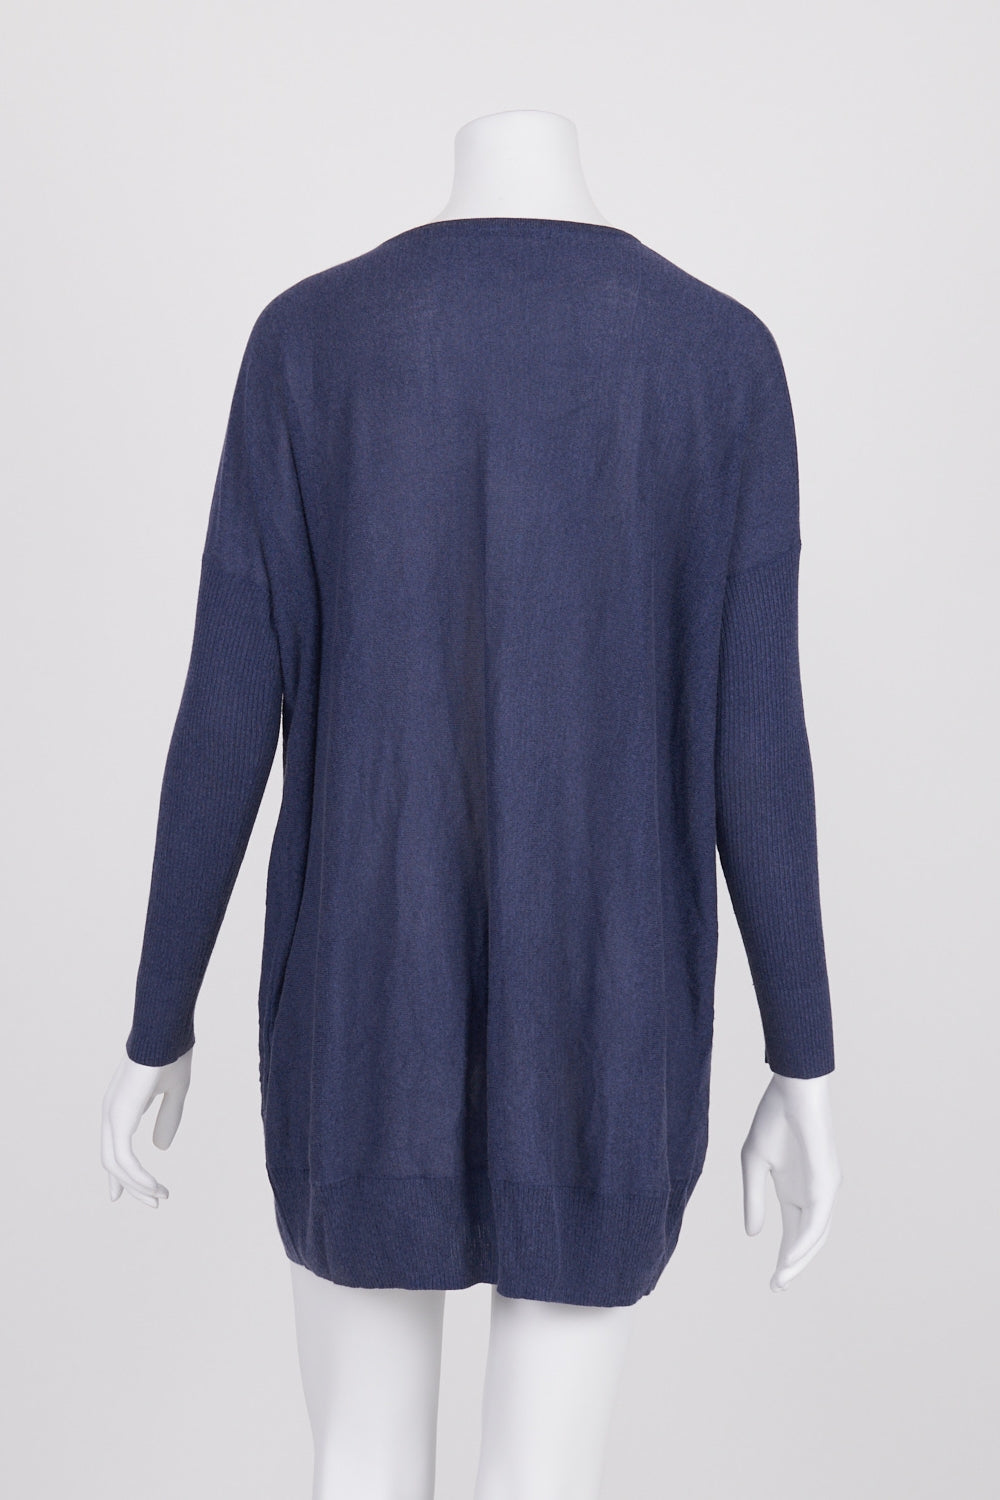 Nikel And Sole Blue Knit Jumper S